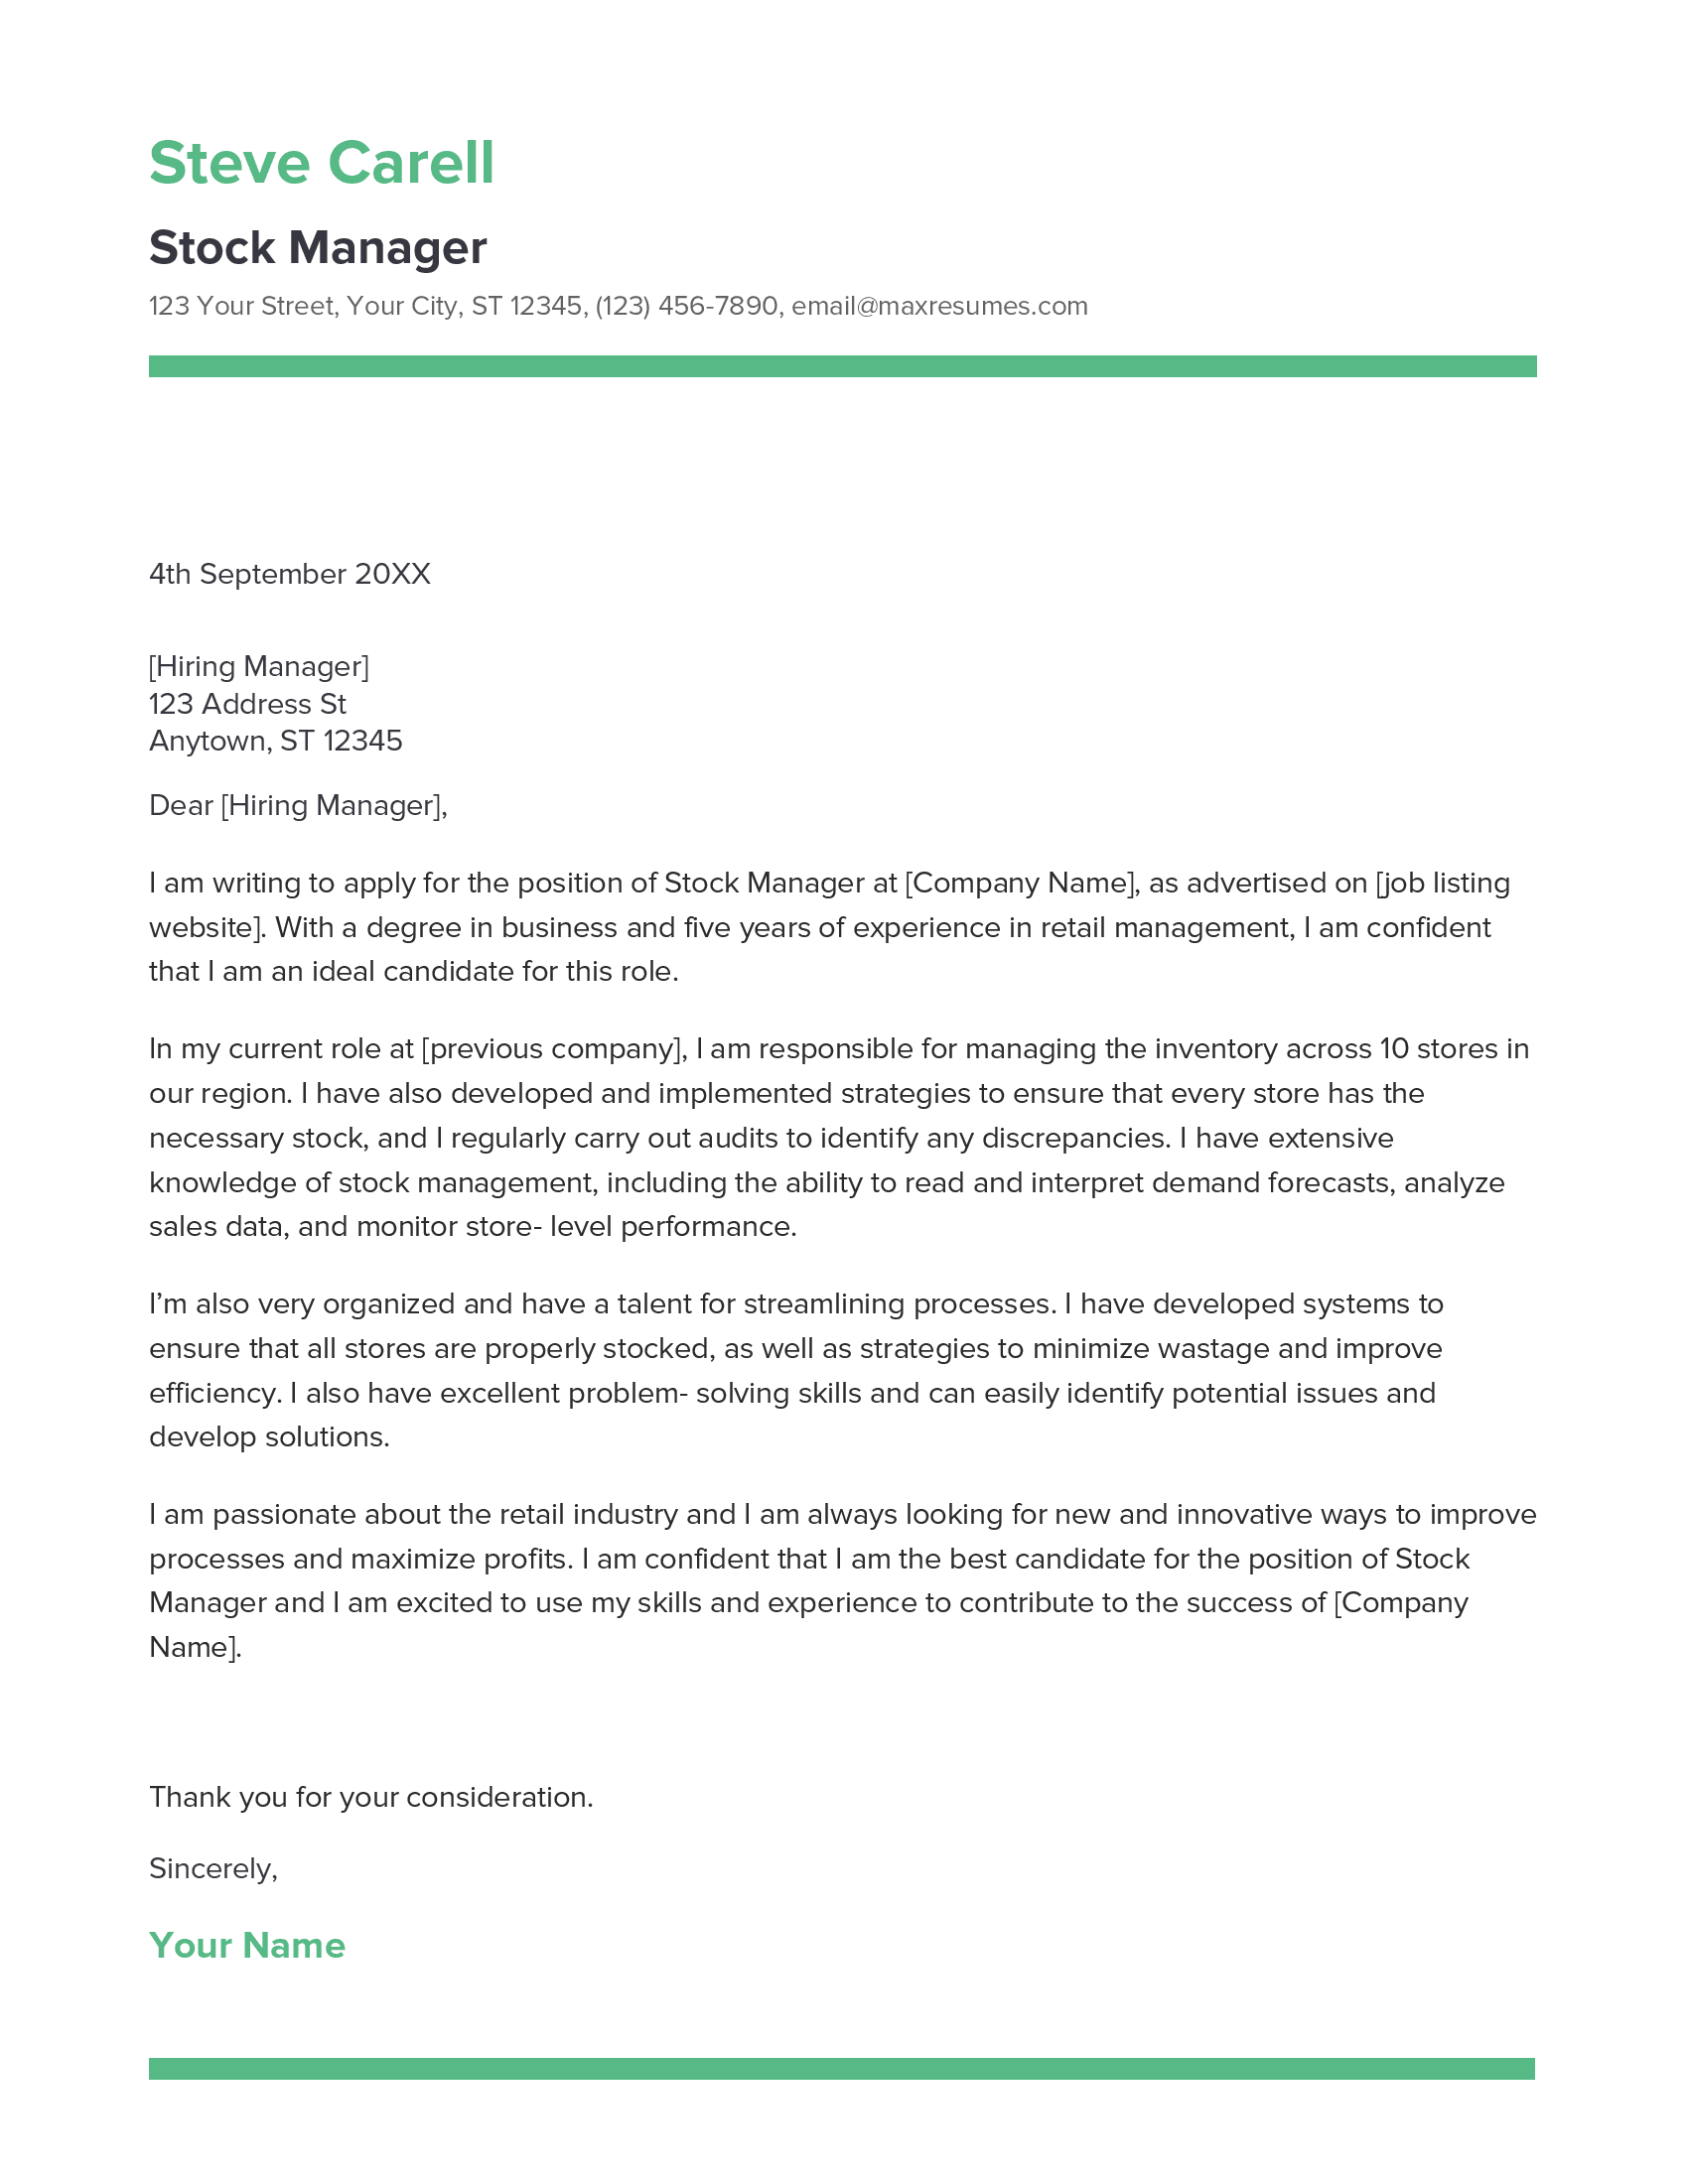 Stock Manager Cover Letter Example